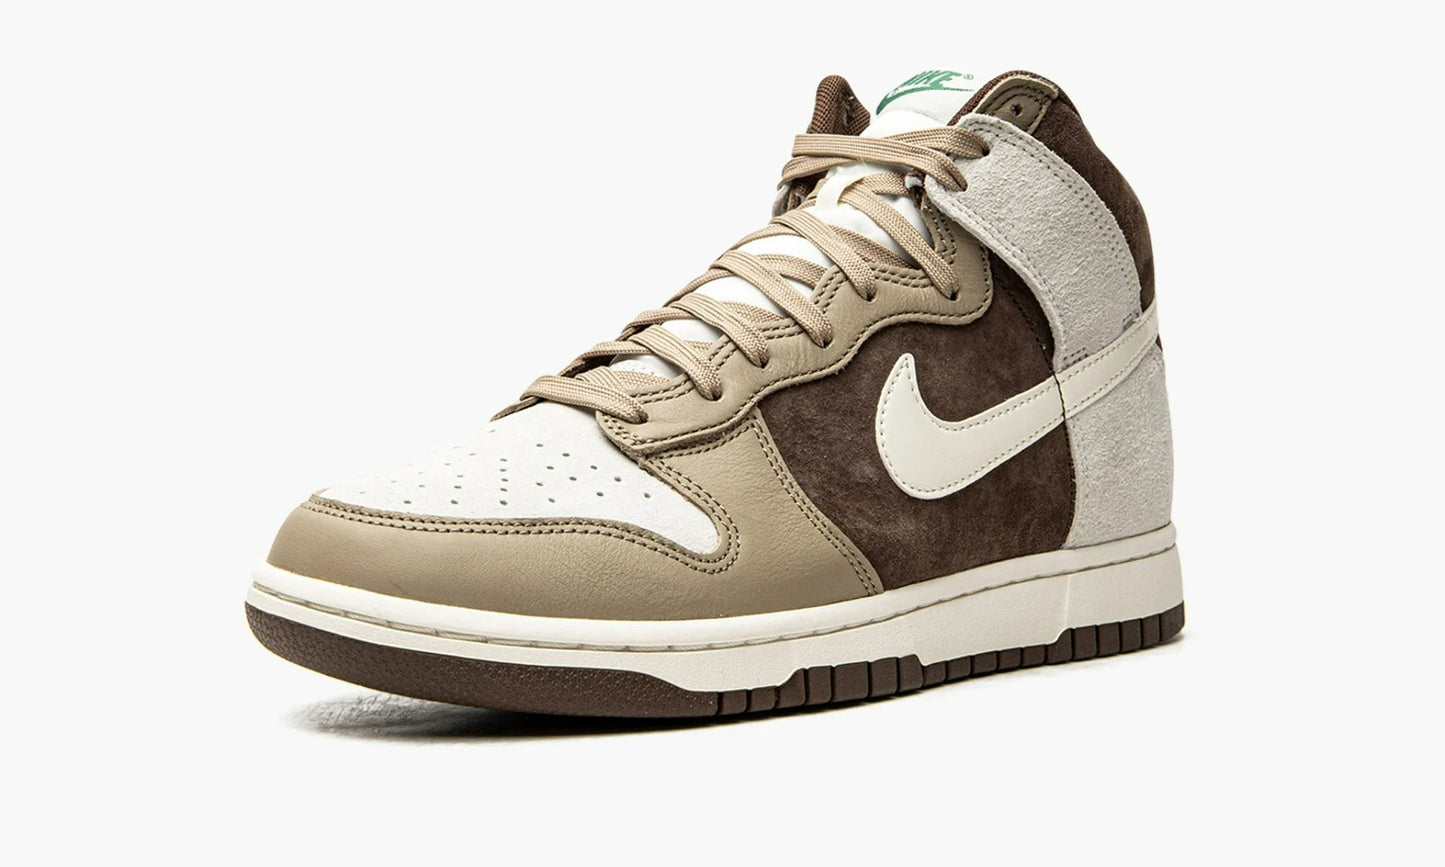 Dunk High Light Chocolate - DH5348 100 | The Sortage